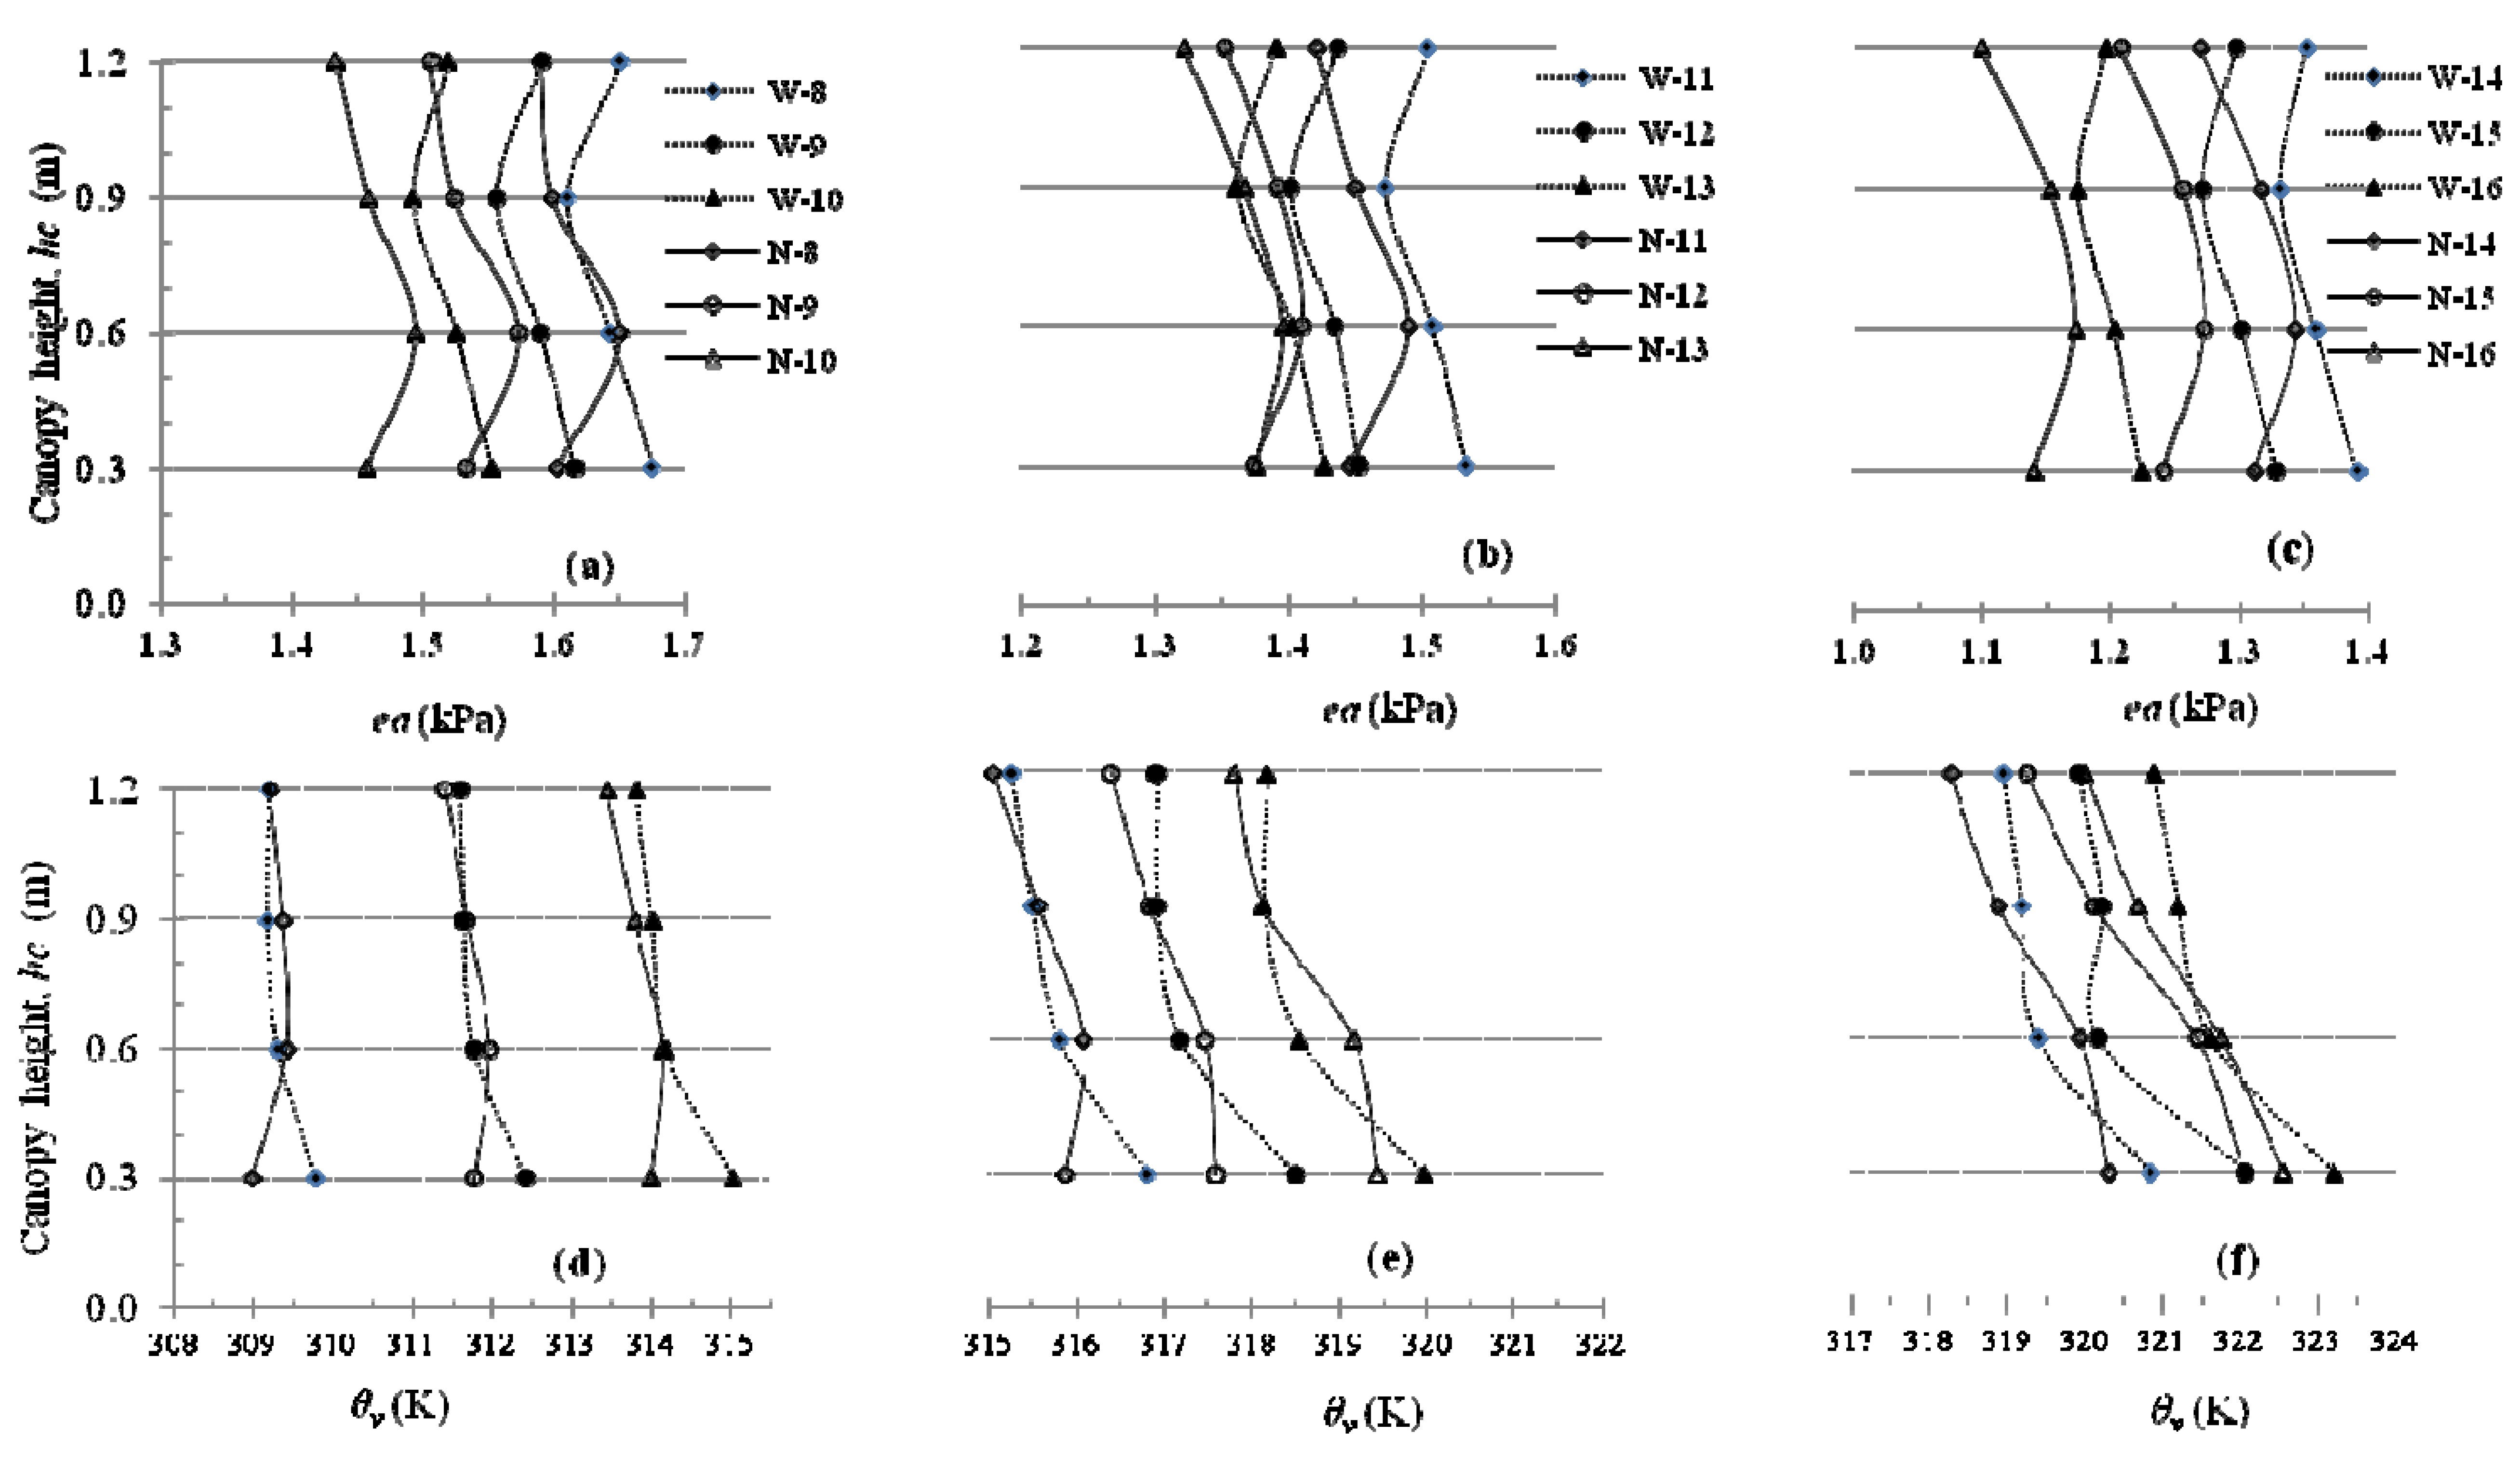 Atmosphere | Free Full-Text | Water Vapor, Temperature and Wind Profiles  within Maize Canopy under in-Field Rainwater Harvesting with Wide and  Narrow Runoff Strips | HTML